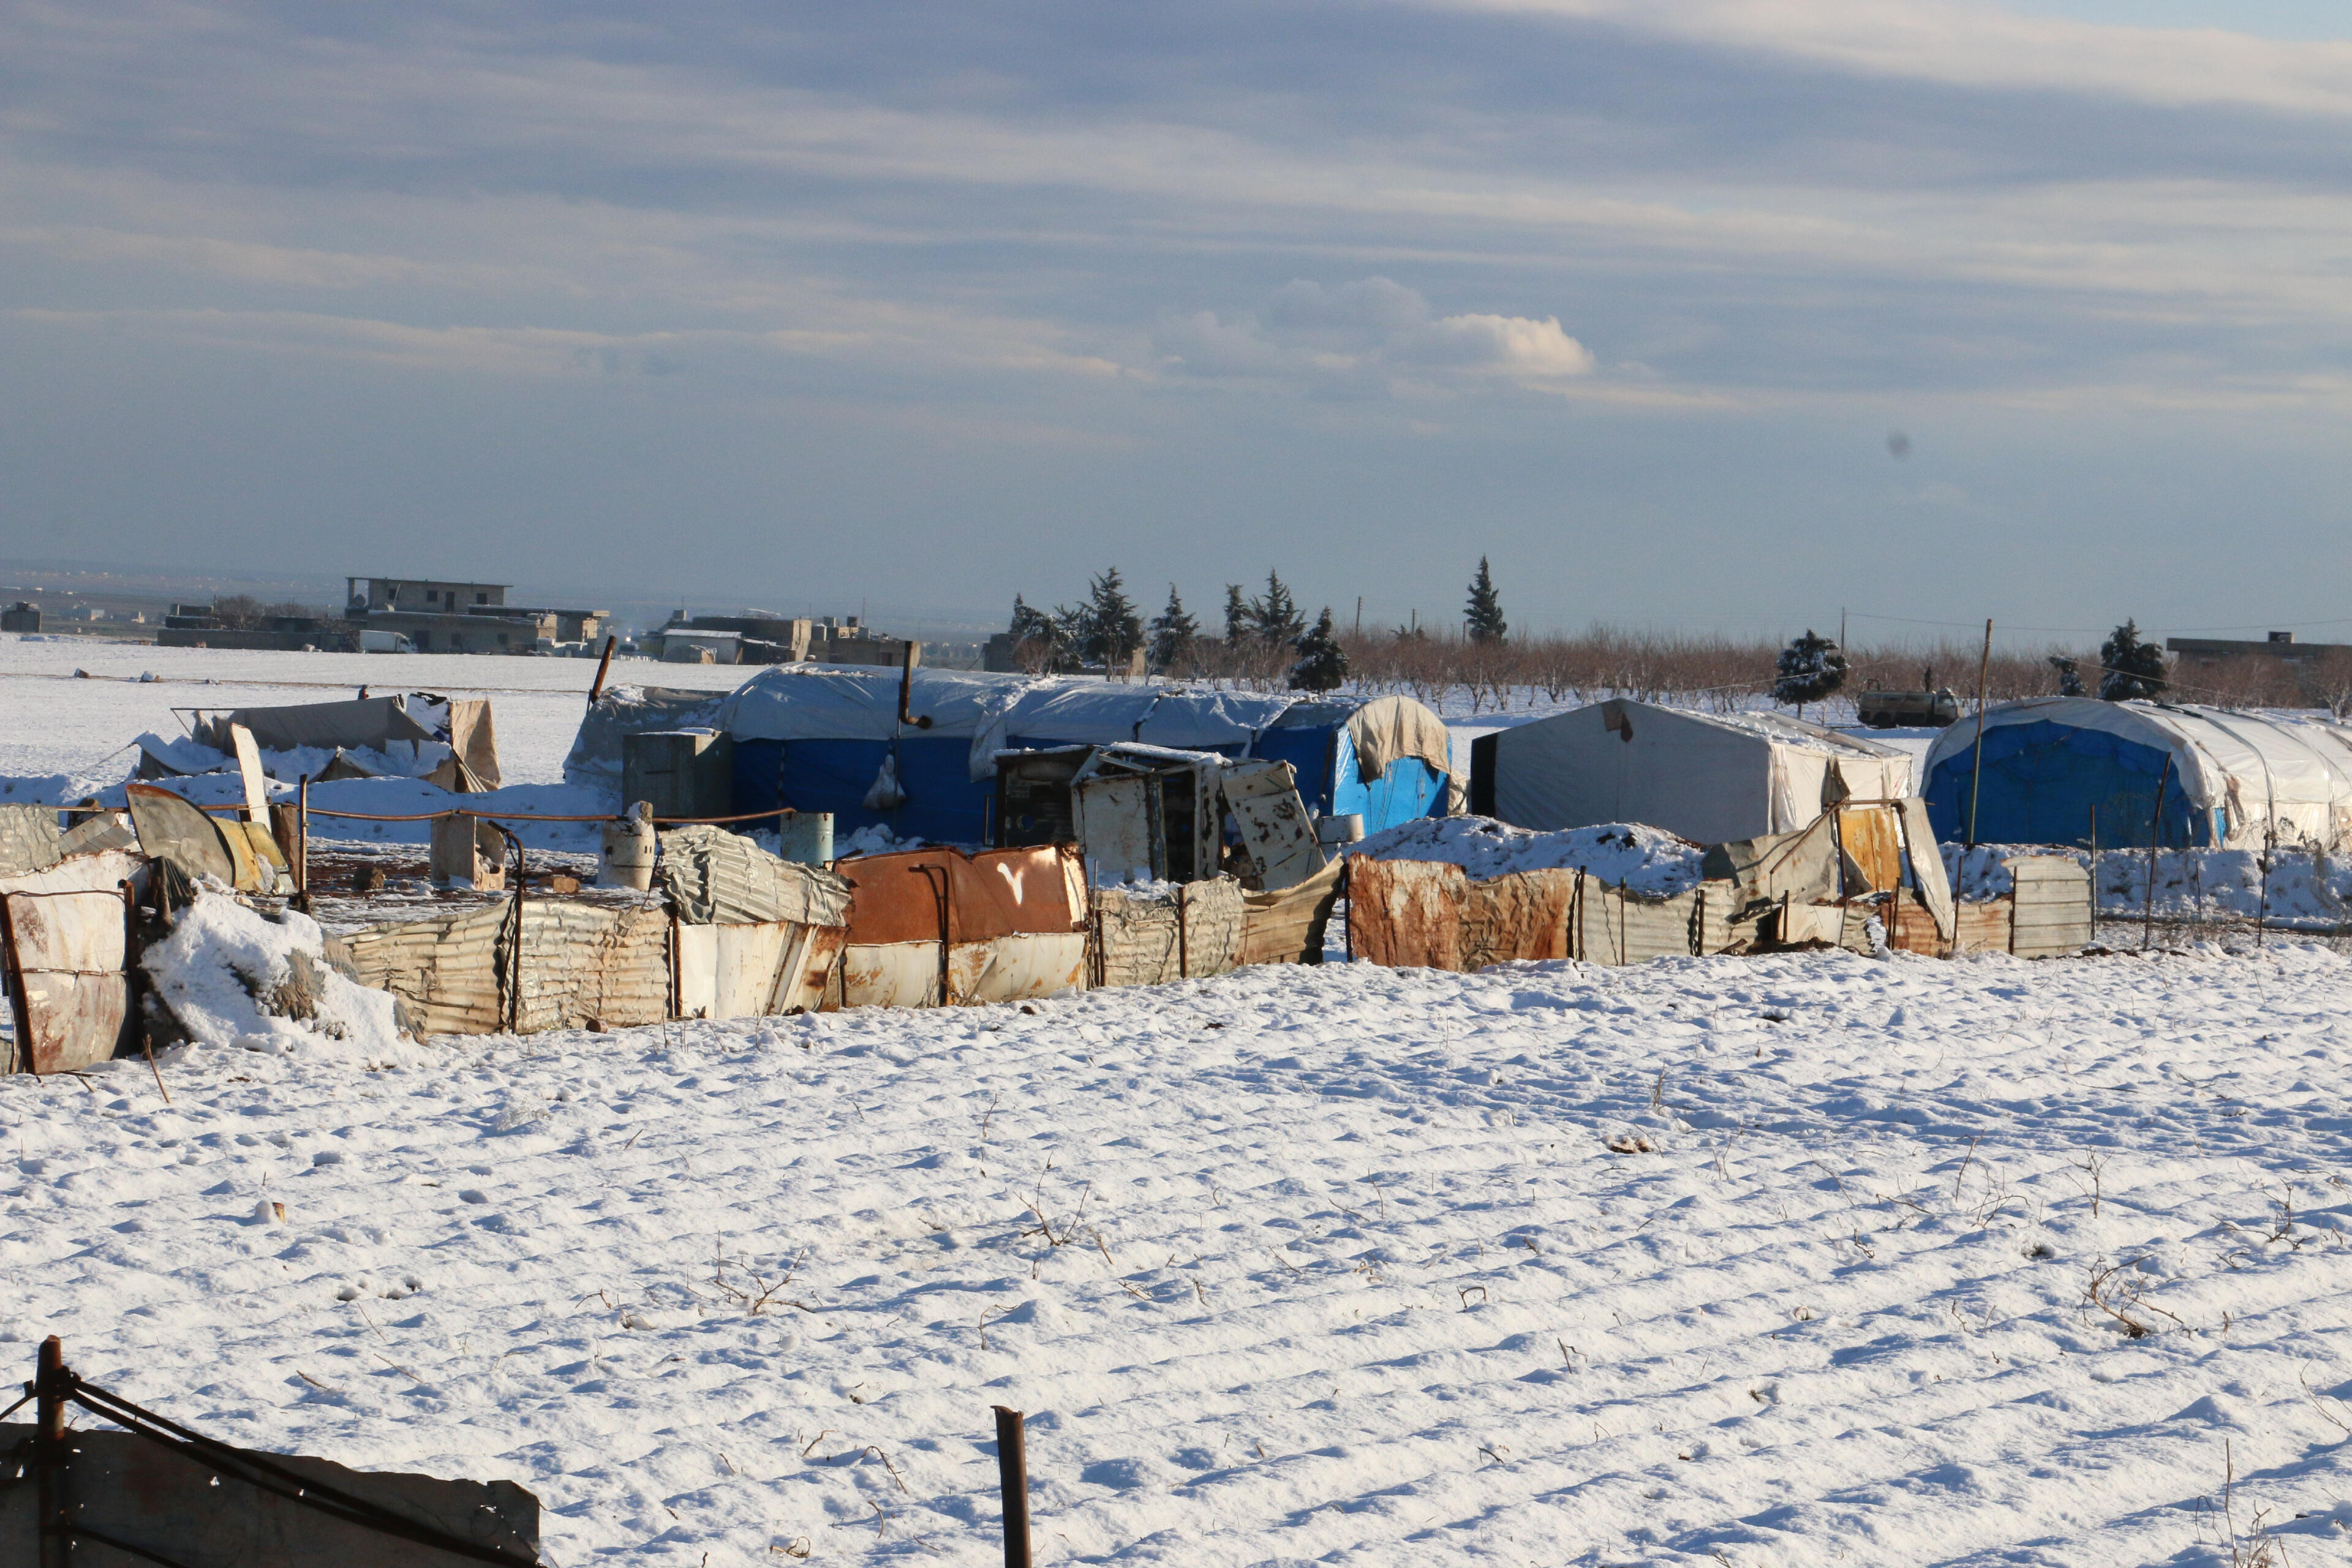 Makeshift shelters housing displaced Syrian families are huddled together in a snow-covered field.